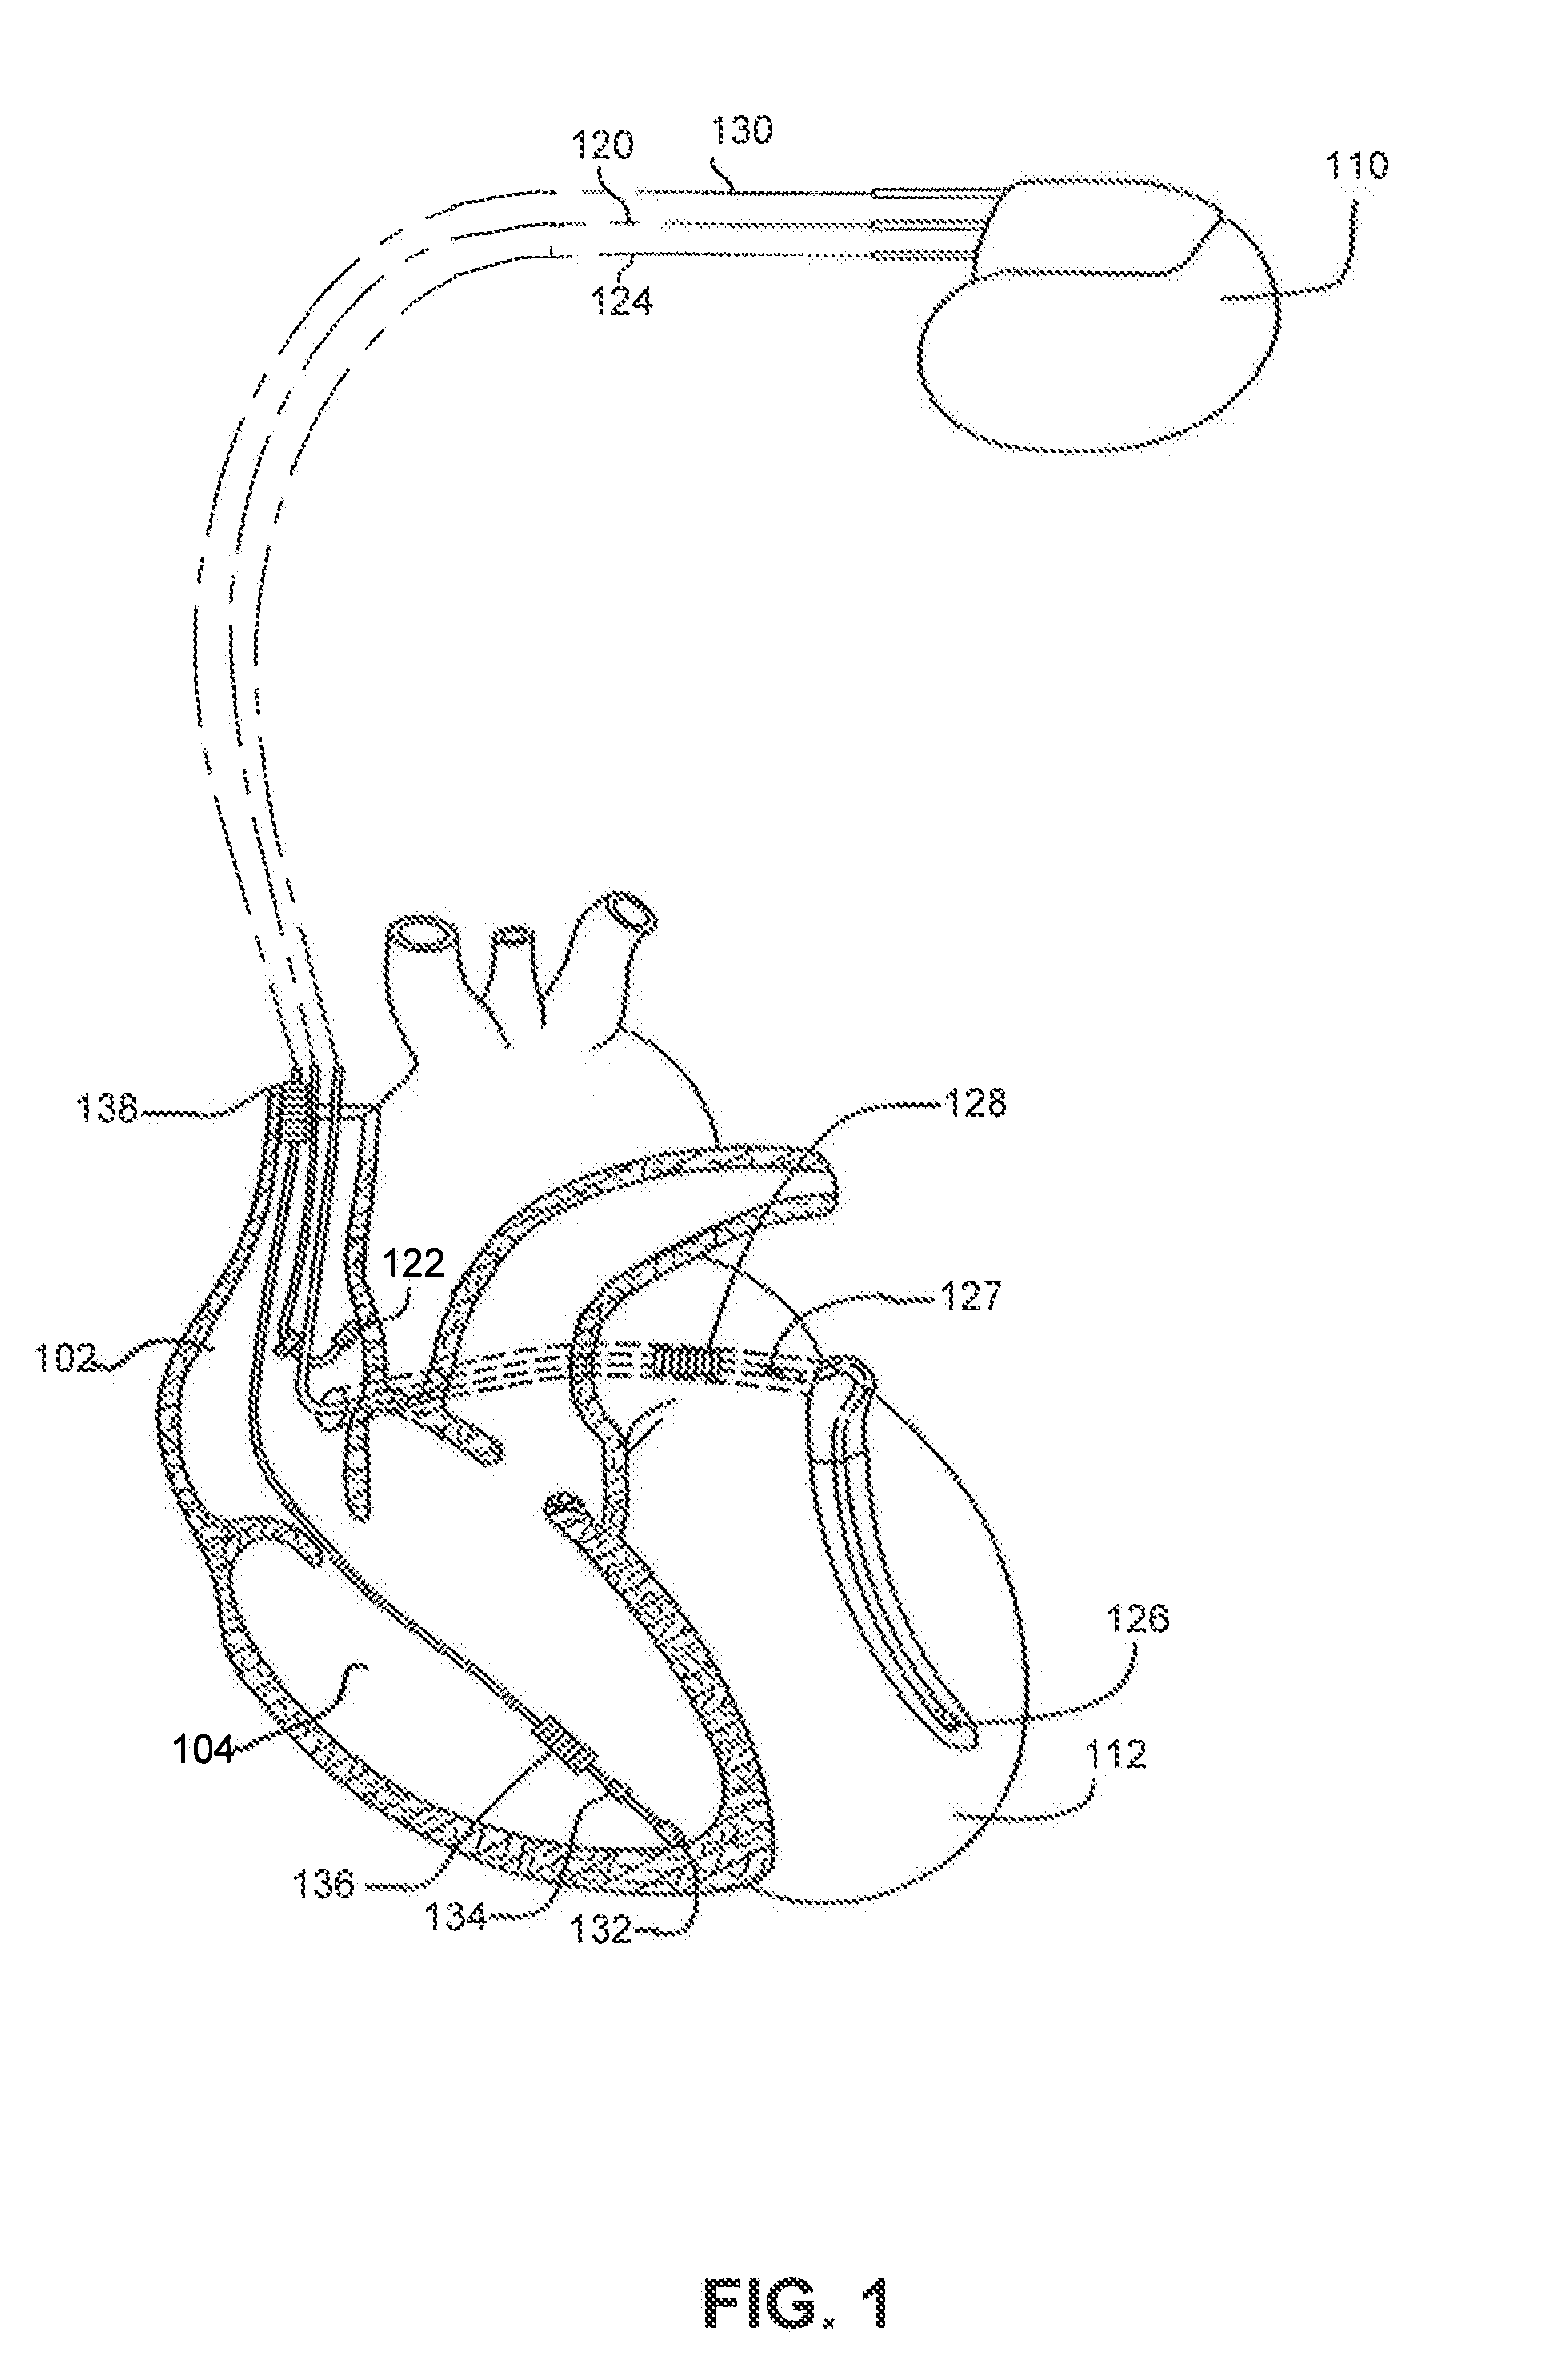 Method and Apparatus for Monitoring Arrythmogenic Effects of Medications Using an Implantable Device